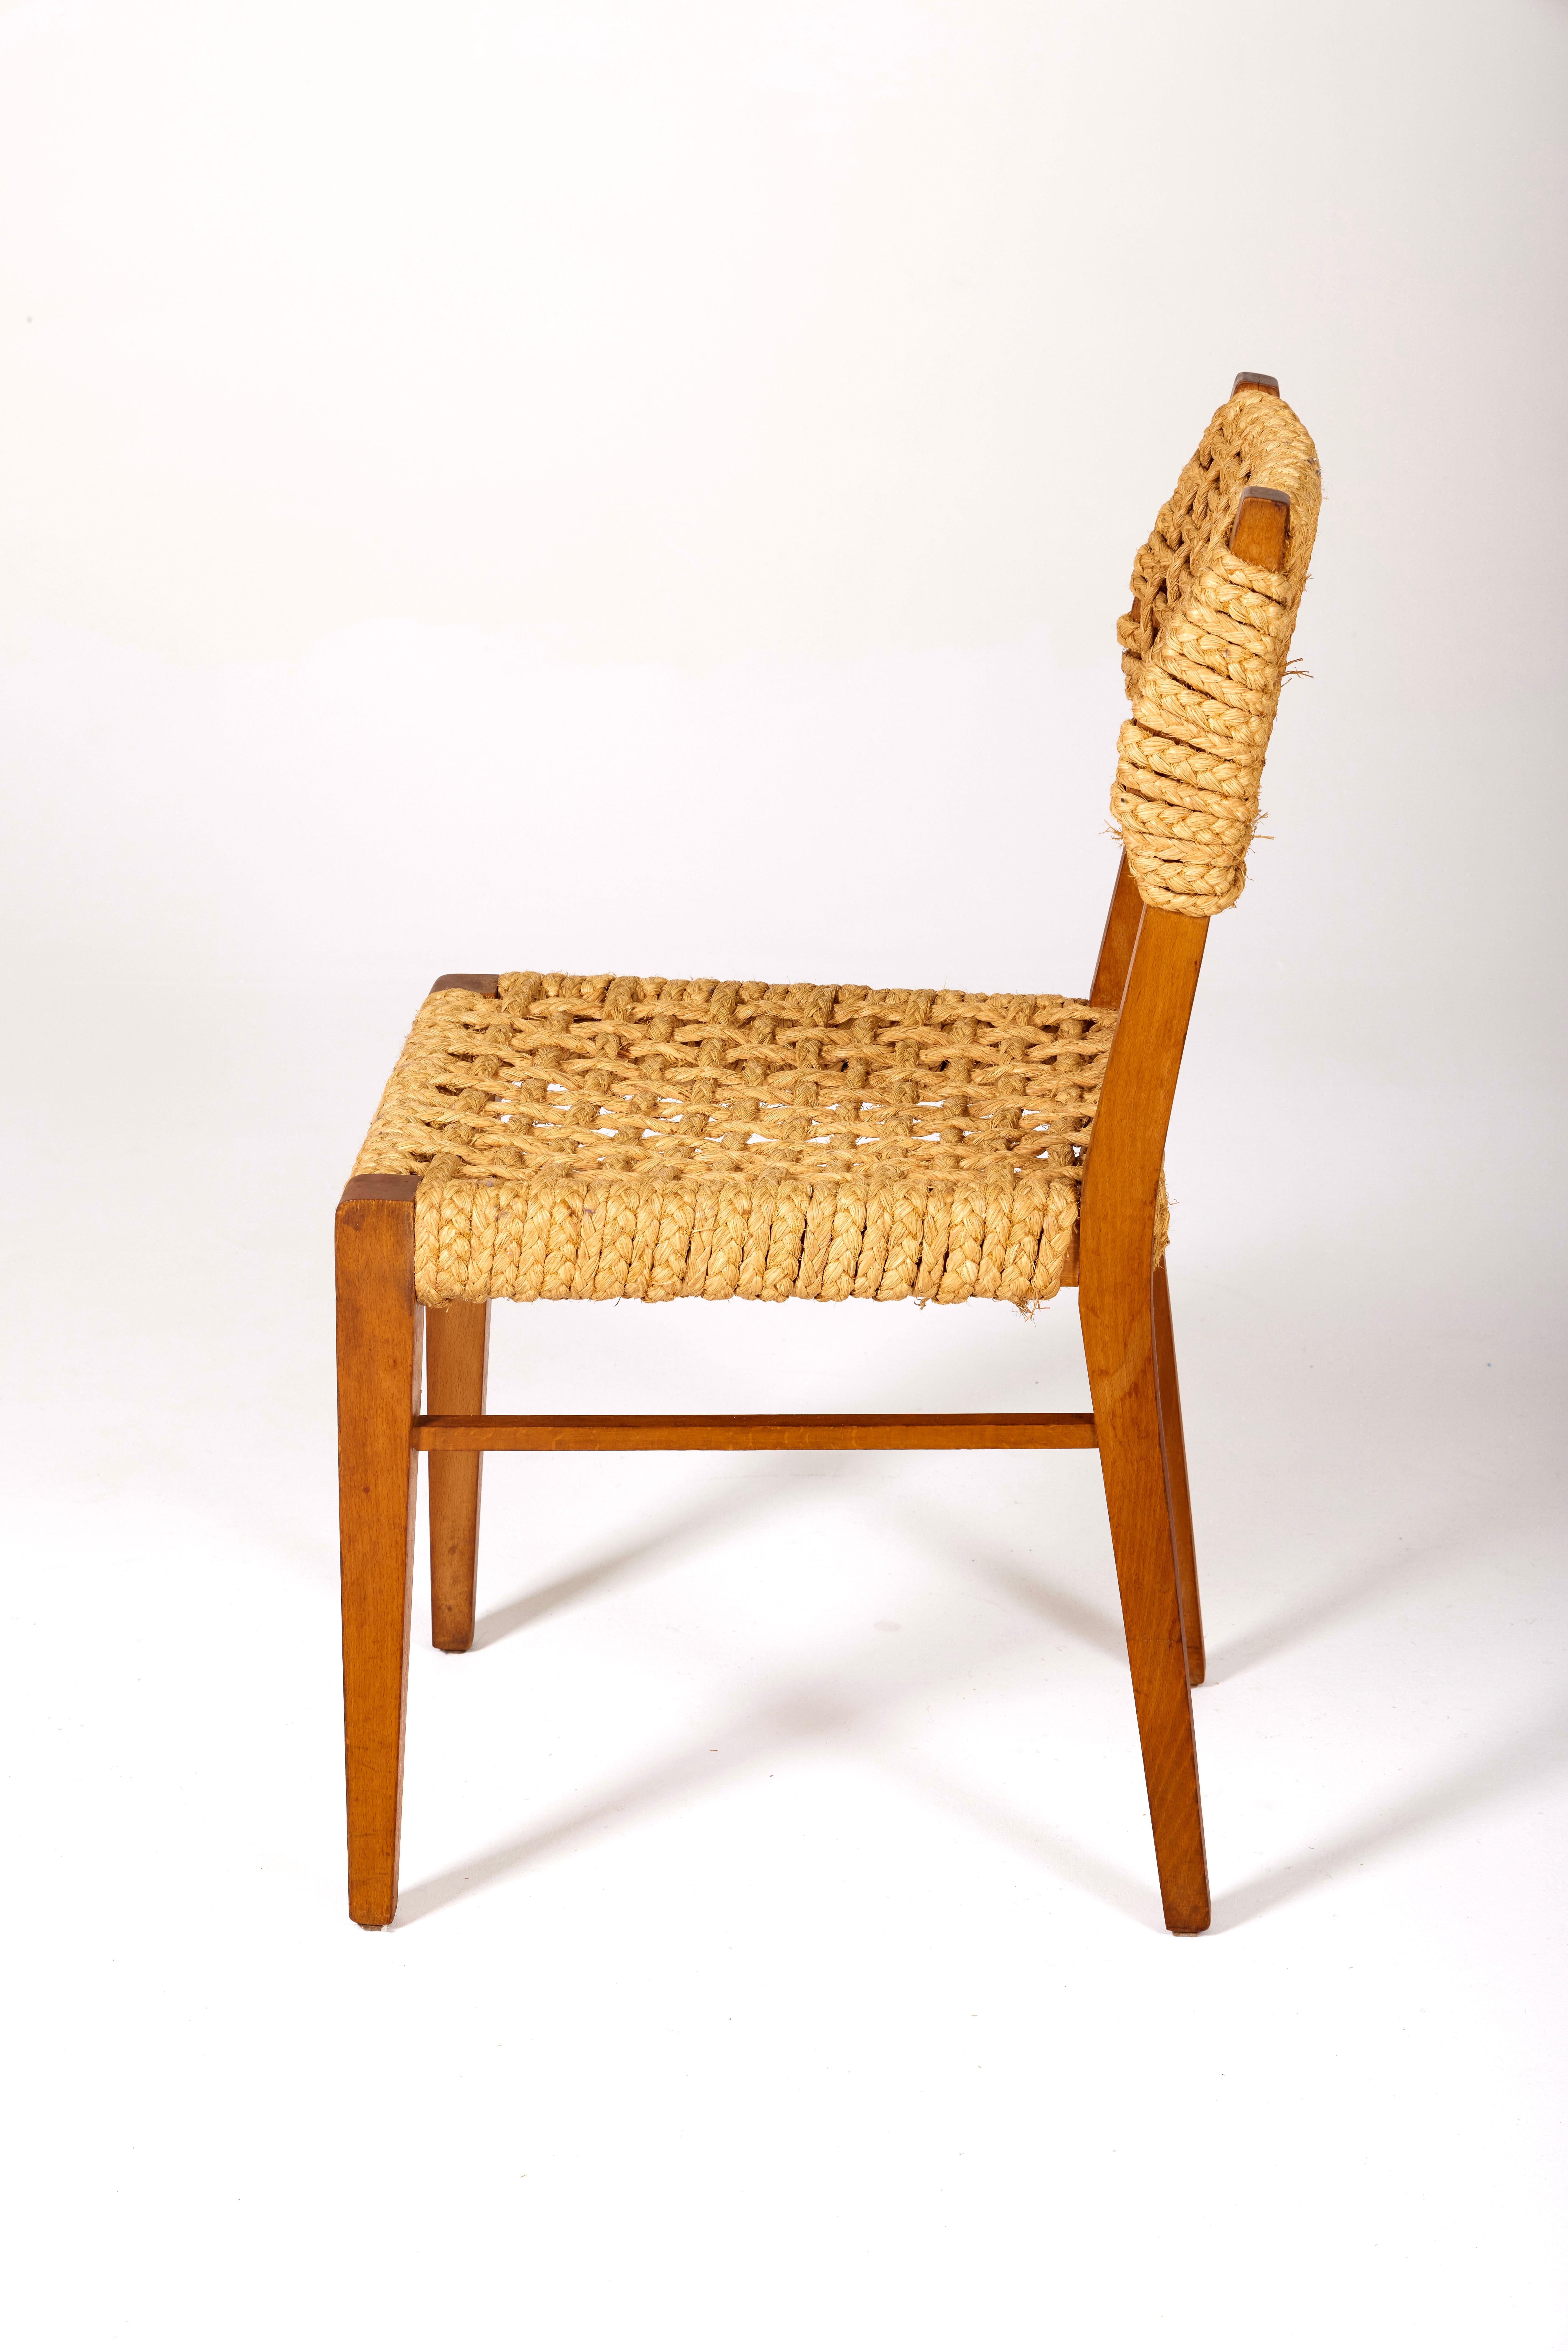 20th Century Wood and Rope Chair from Audoux & Minet, 1960s